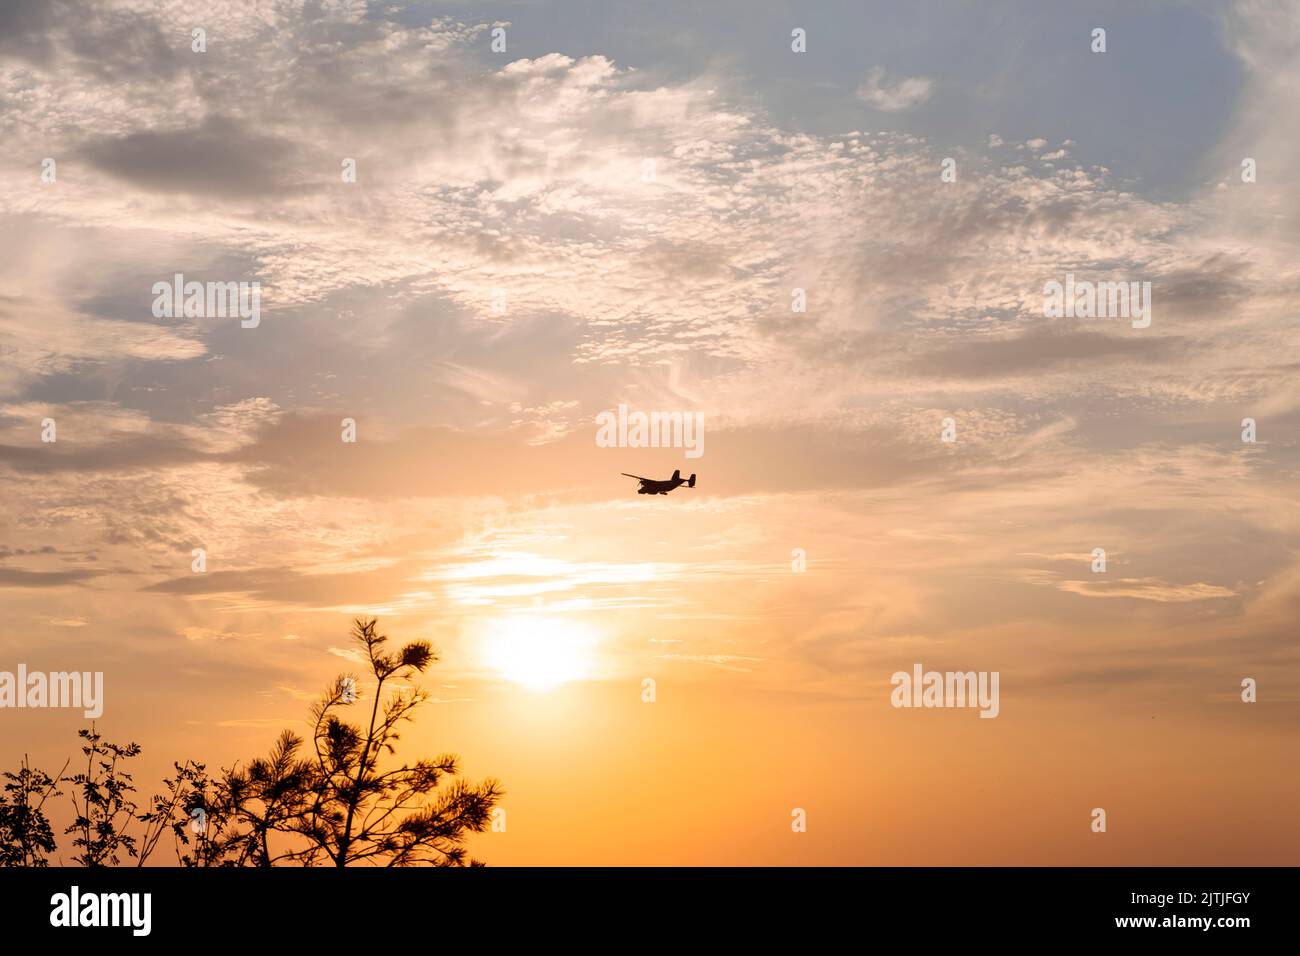 Airplane dark silhouette on orange sunset sky with clouds. Propeller plane outline shape on setting sun background. Stock Photo